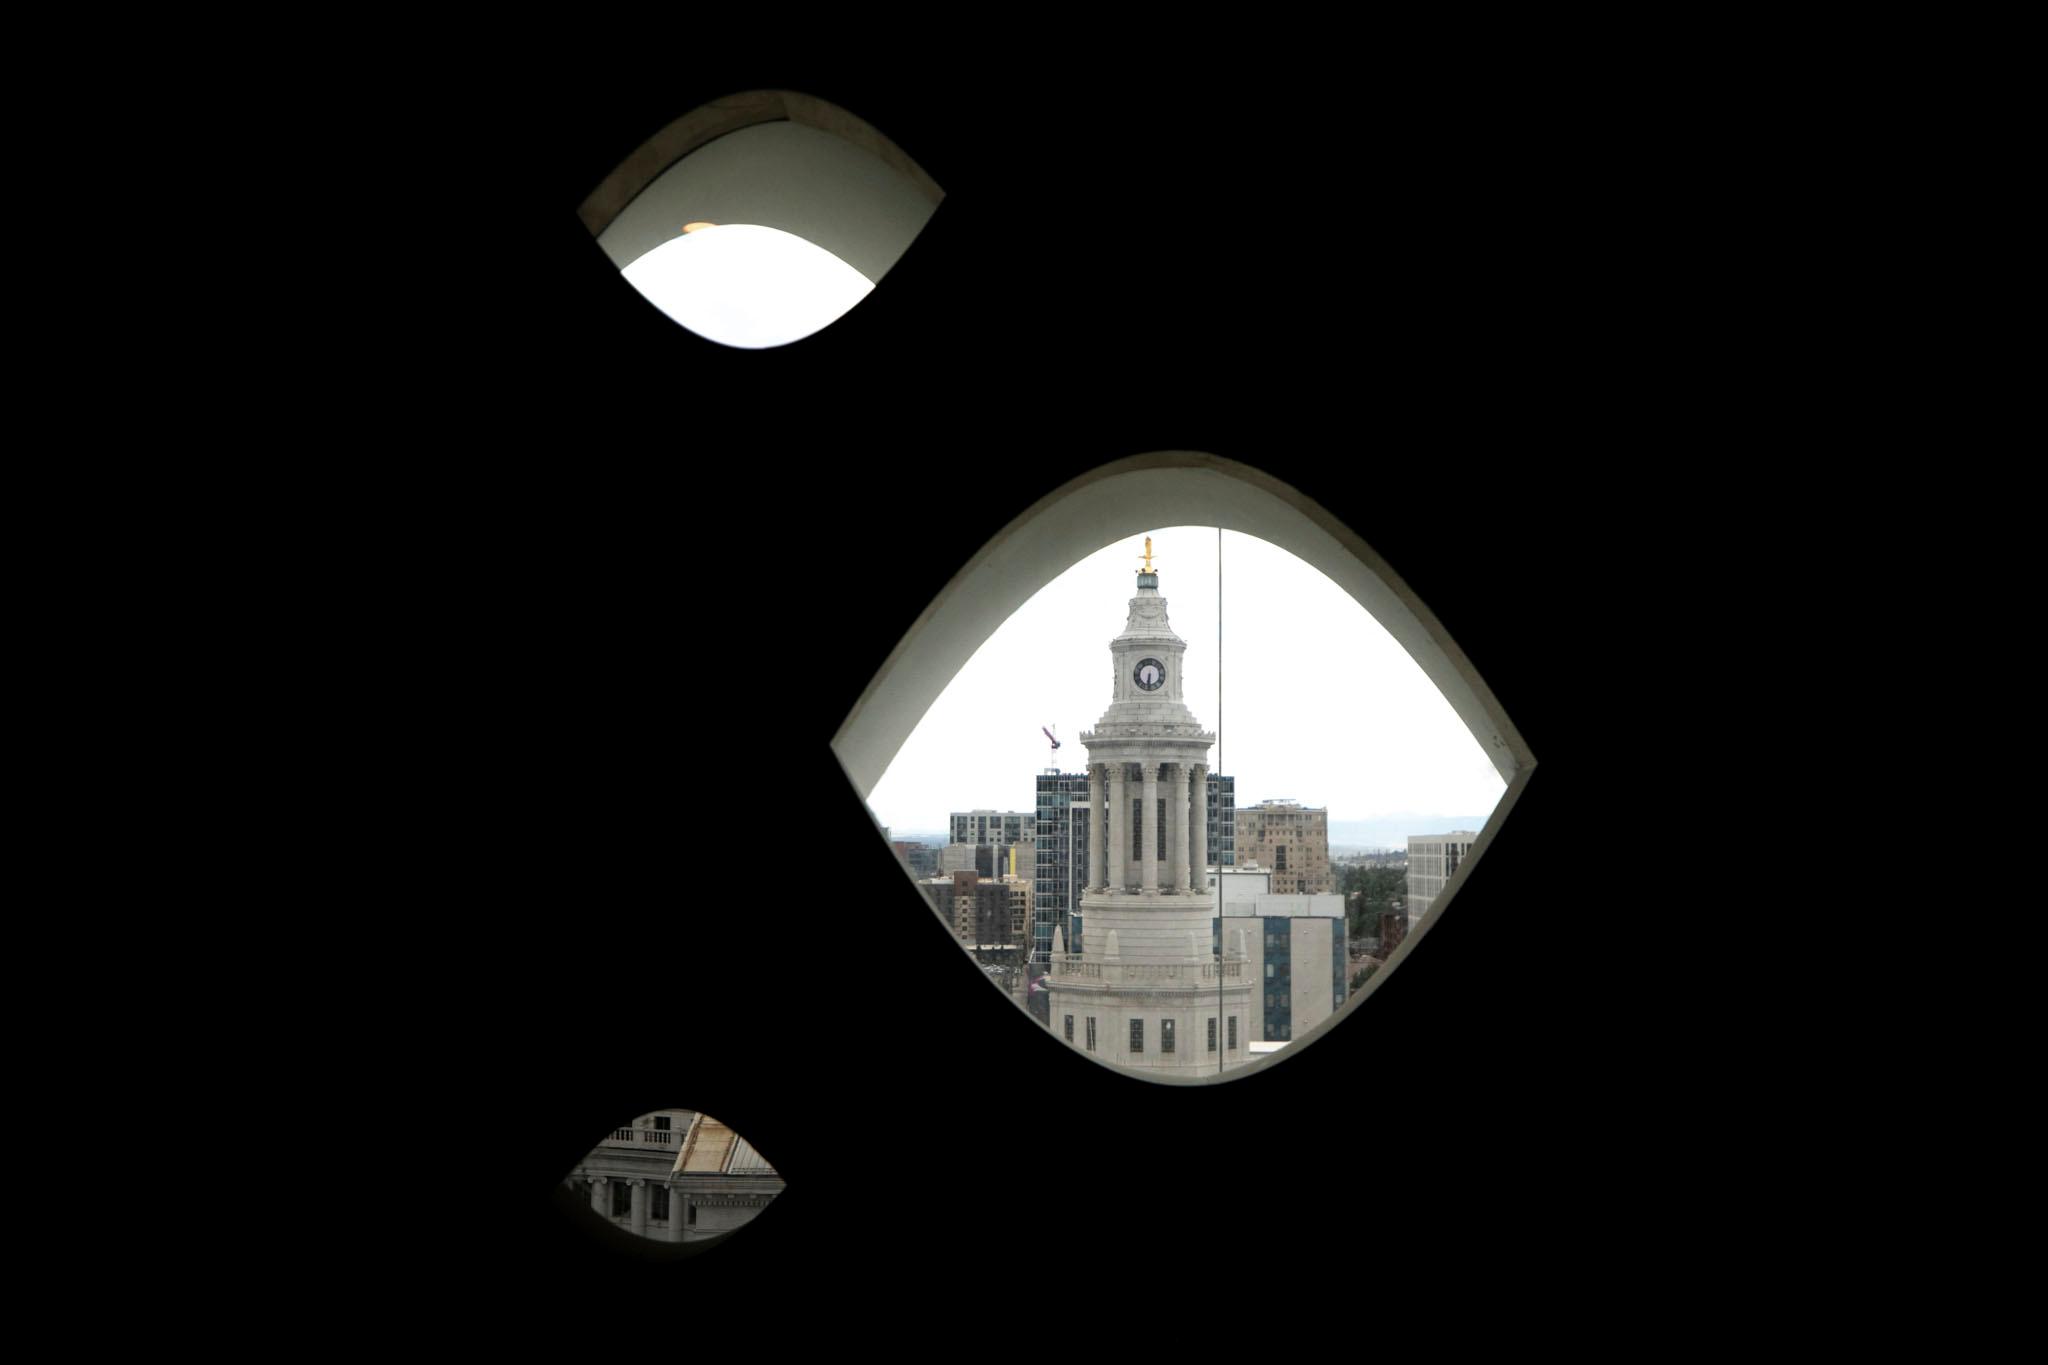 A stone clocktower is seen through one of three eyeball-shaped windows; the room inside is completely black.